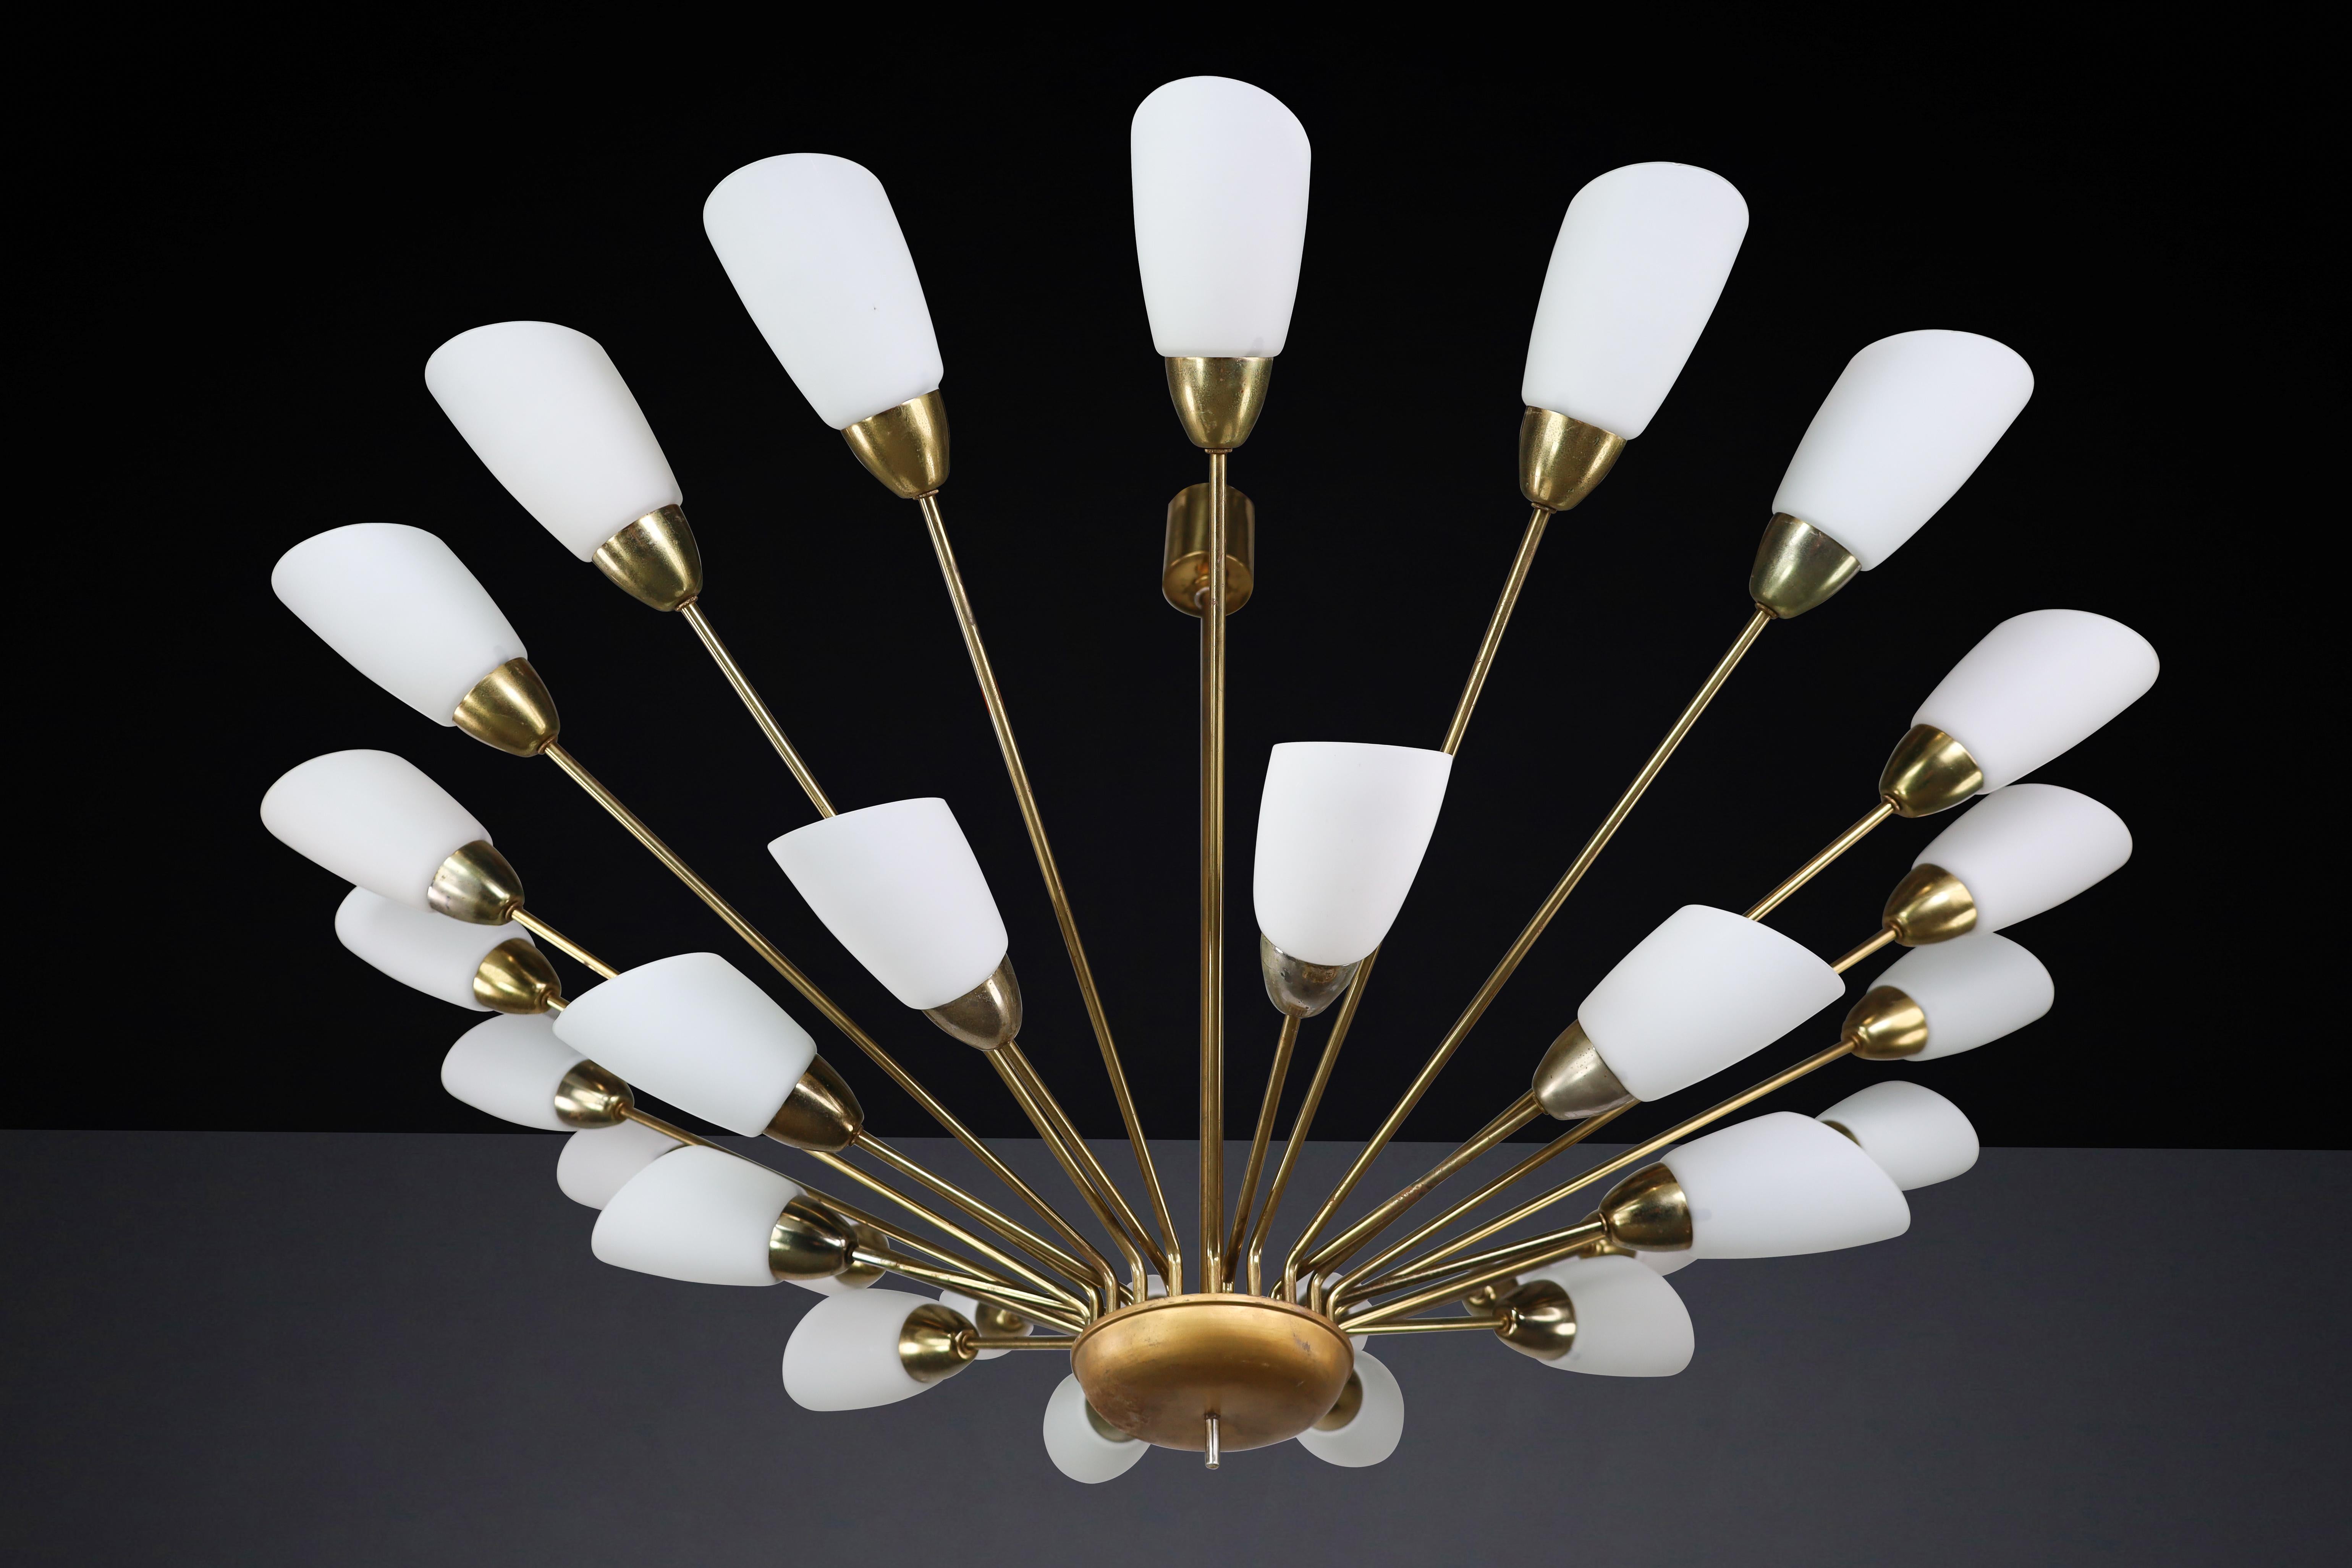 Large Midcentury Spider Form Sputnik Chandelier in Brass and 30 Glass Shade, Germany 1950s

This large Sputnik chandelier is a one-of-a-kind midcentury modern piece with a sculptural spider form design on a brass frame. It has 30 (E27) sockets and